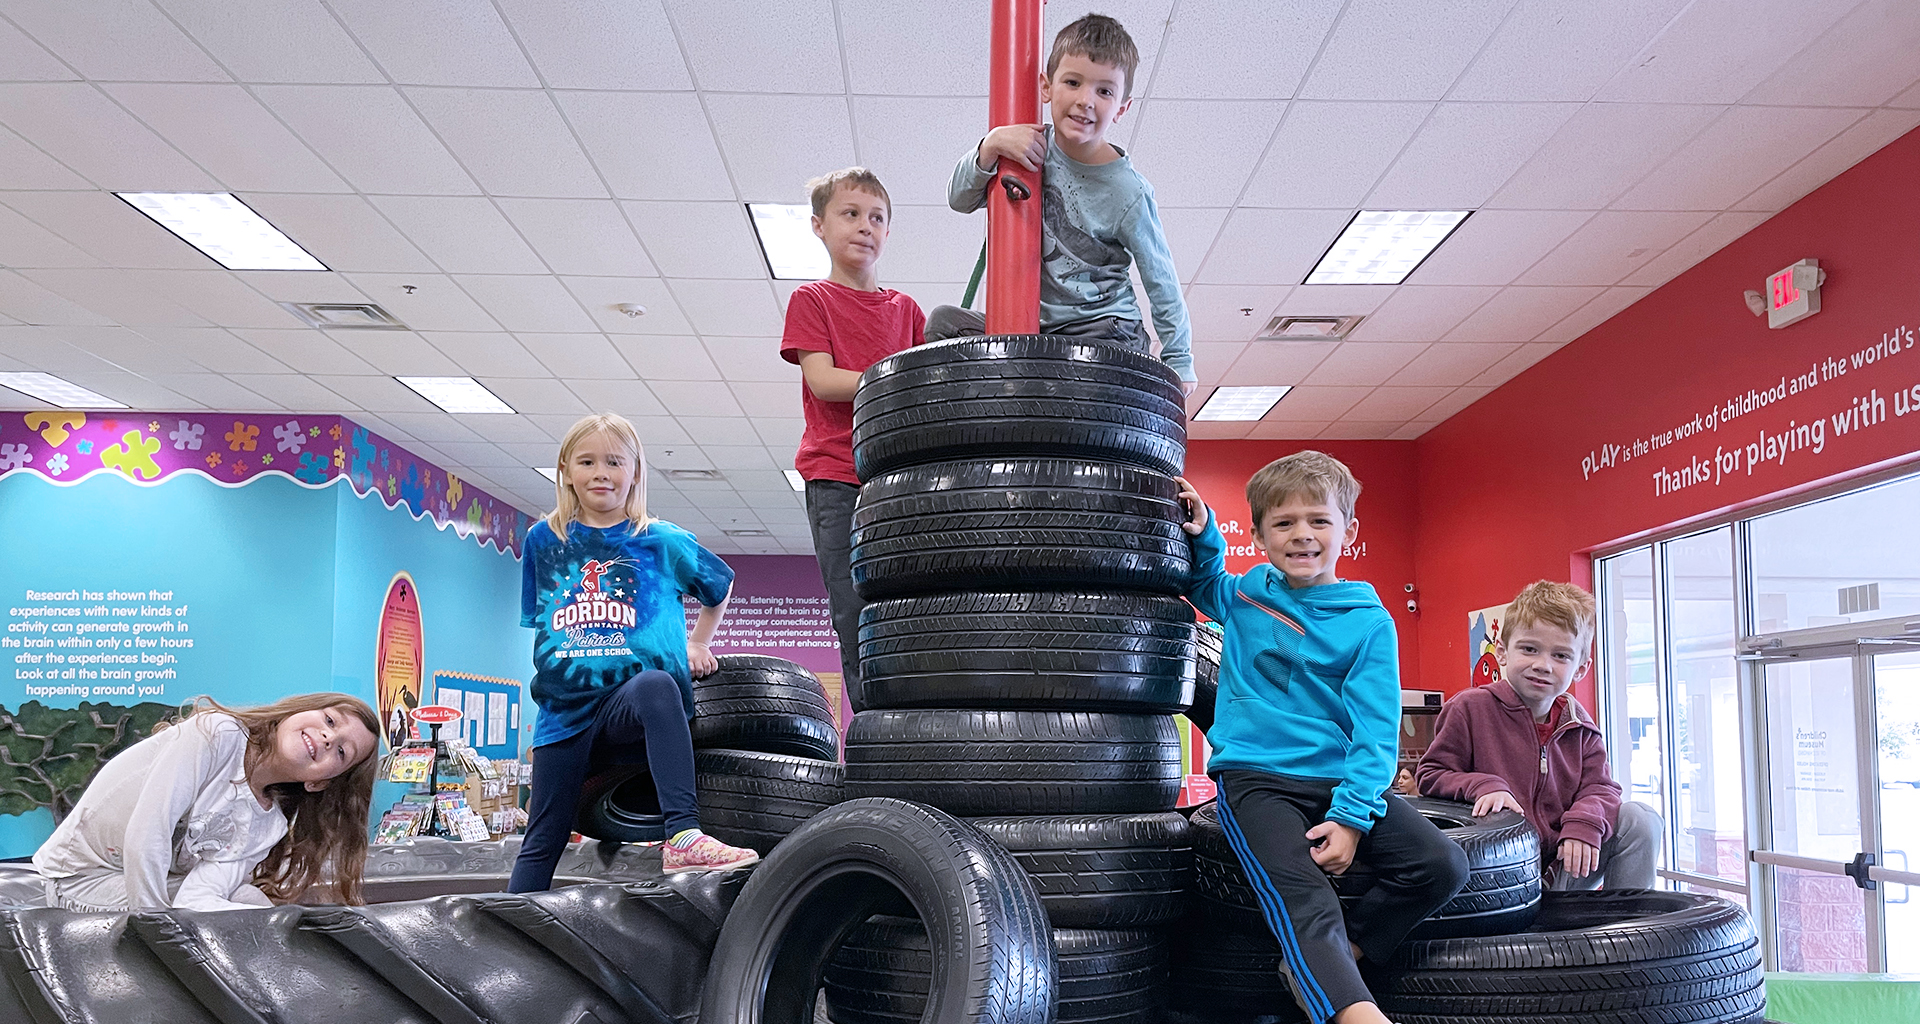 Students climb a giant pile of tires.